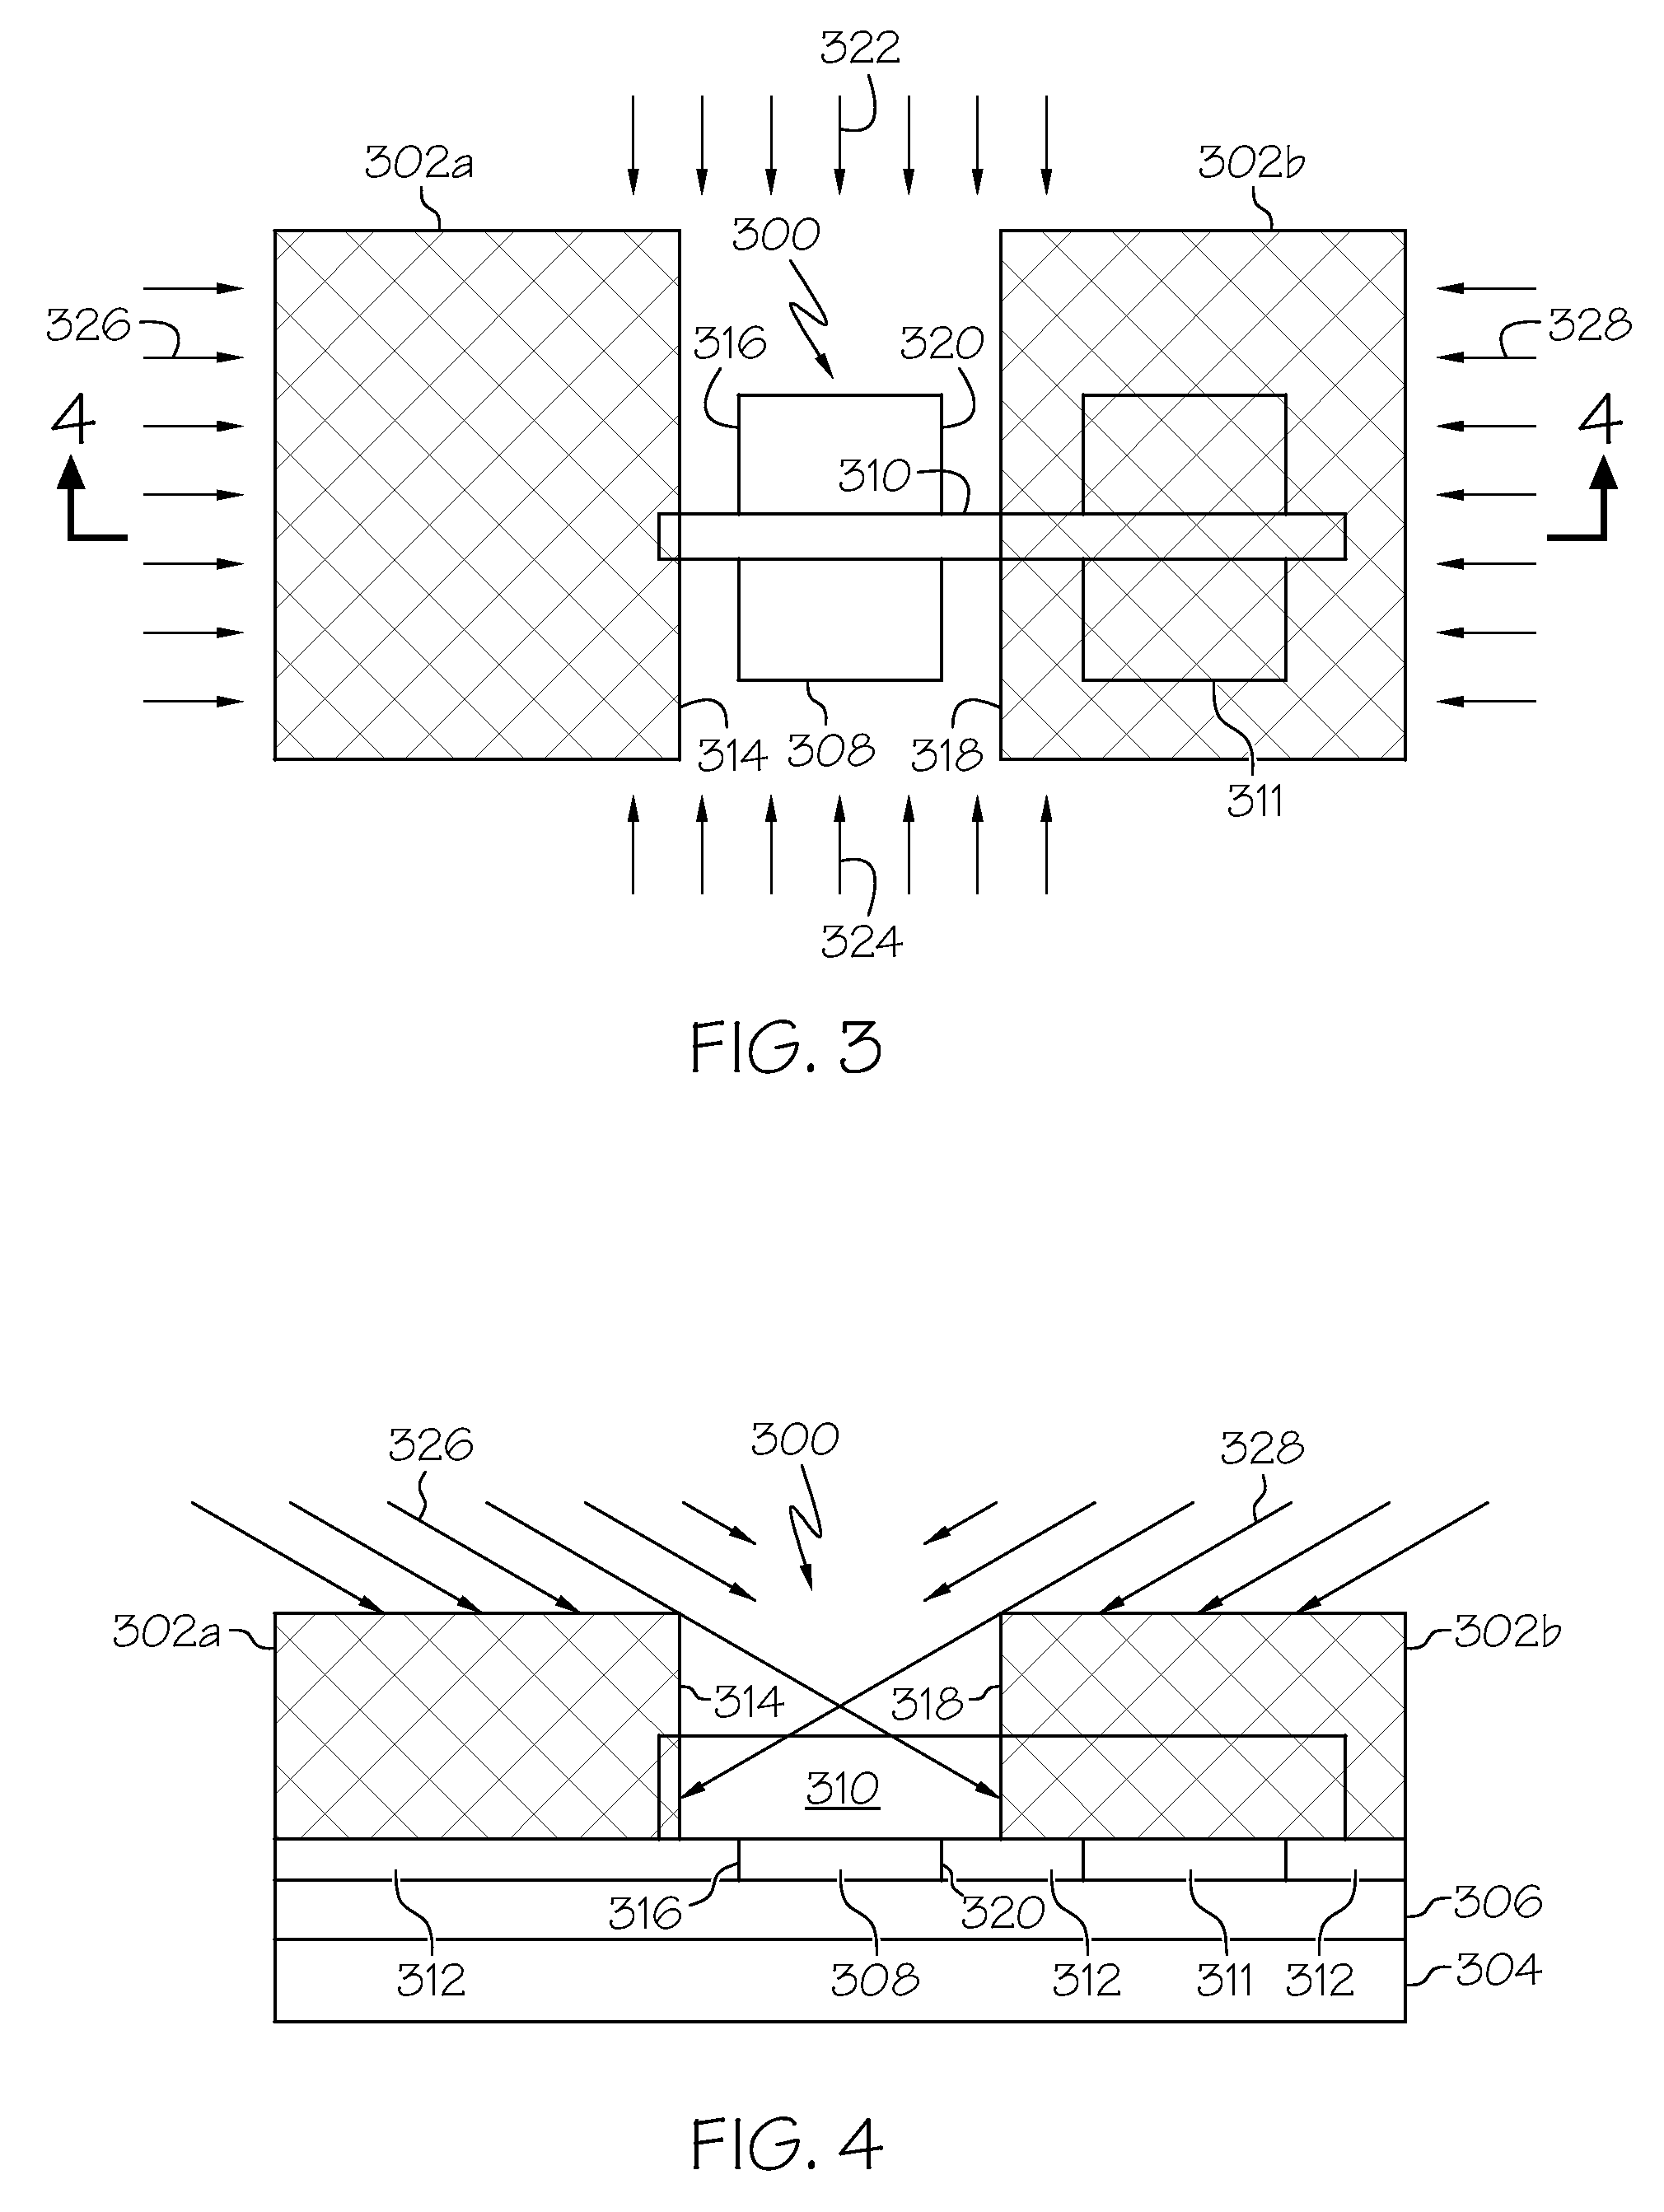 Method of forming transistor devices with different threshold voltages using halo implant shadowing